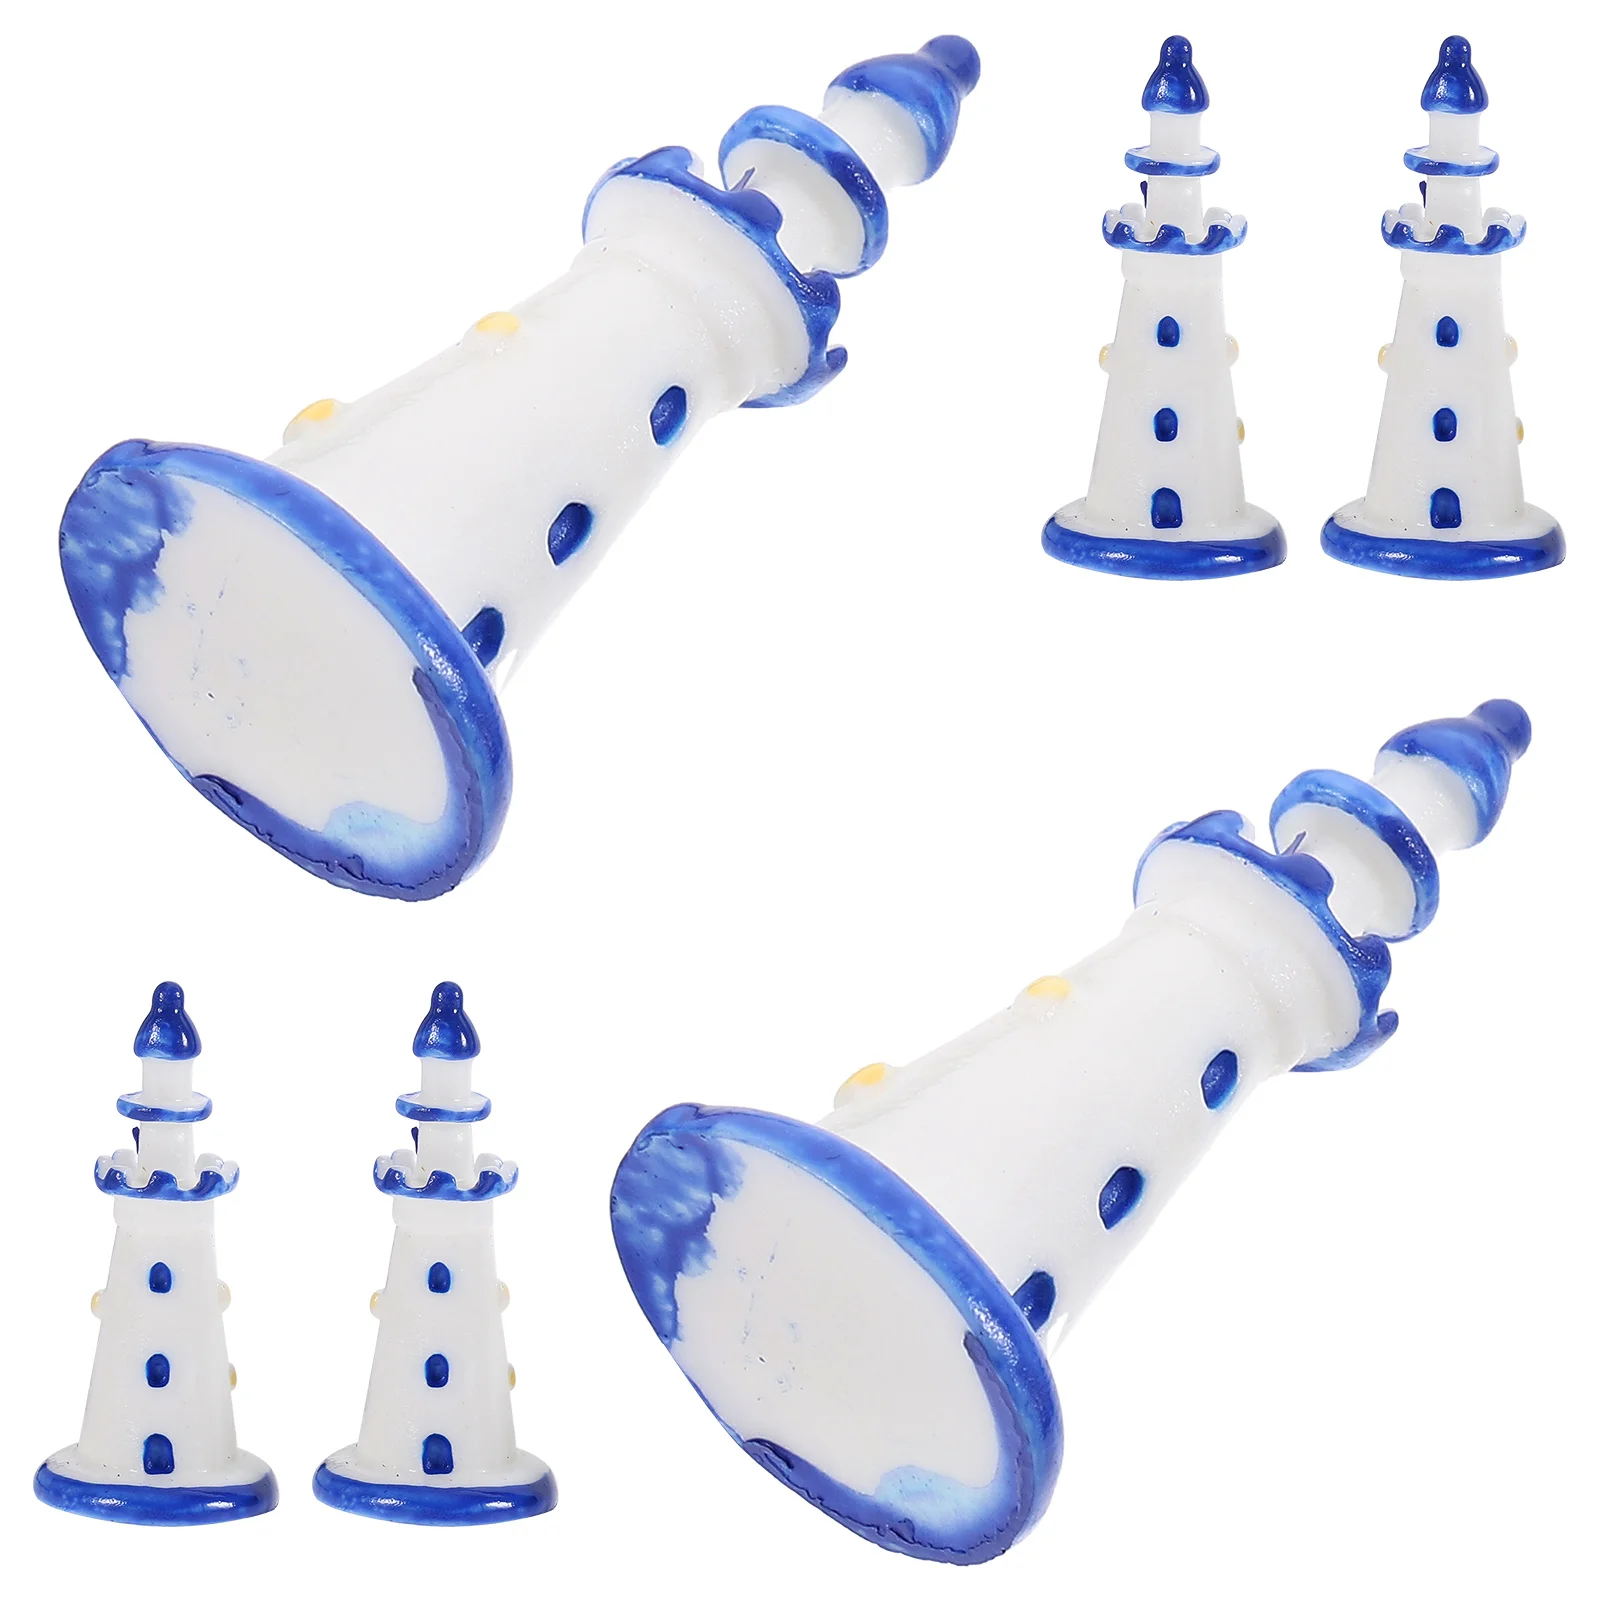 10 Pcs Household Mini Lighthouse Home Decor Scenery Decorations Resin Photography Props dvotinst newborn baby photography props cool mini wigwam camping tent outfits lights decorations set studio shooting photo props